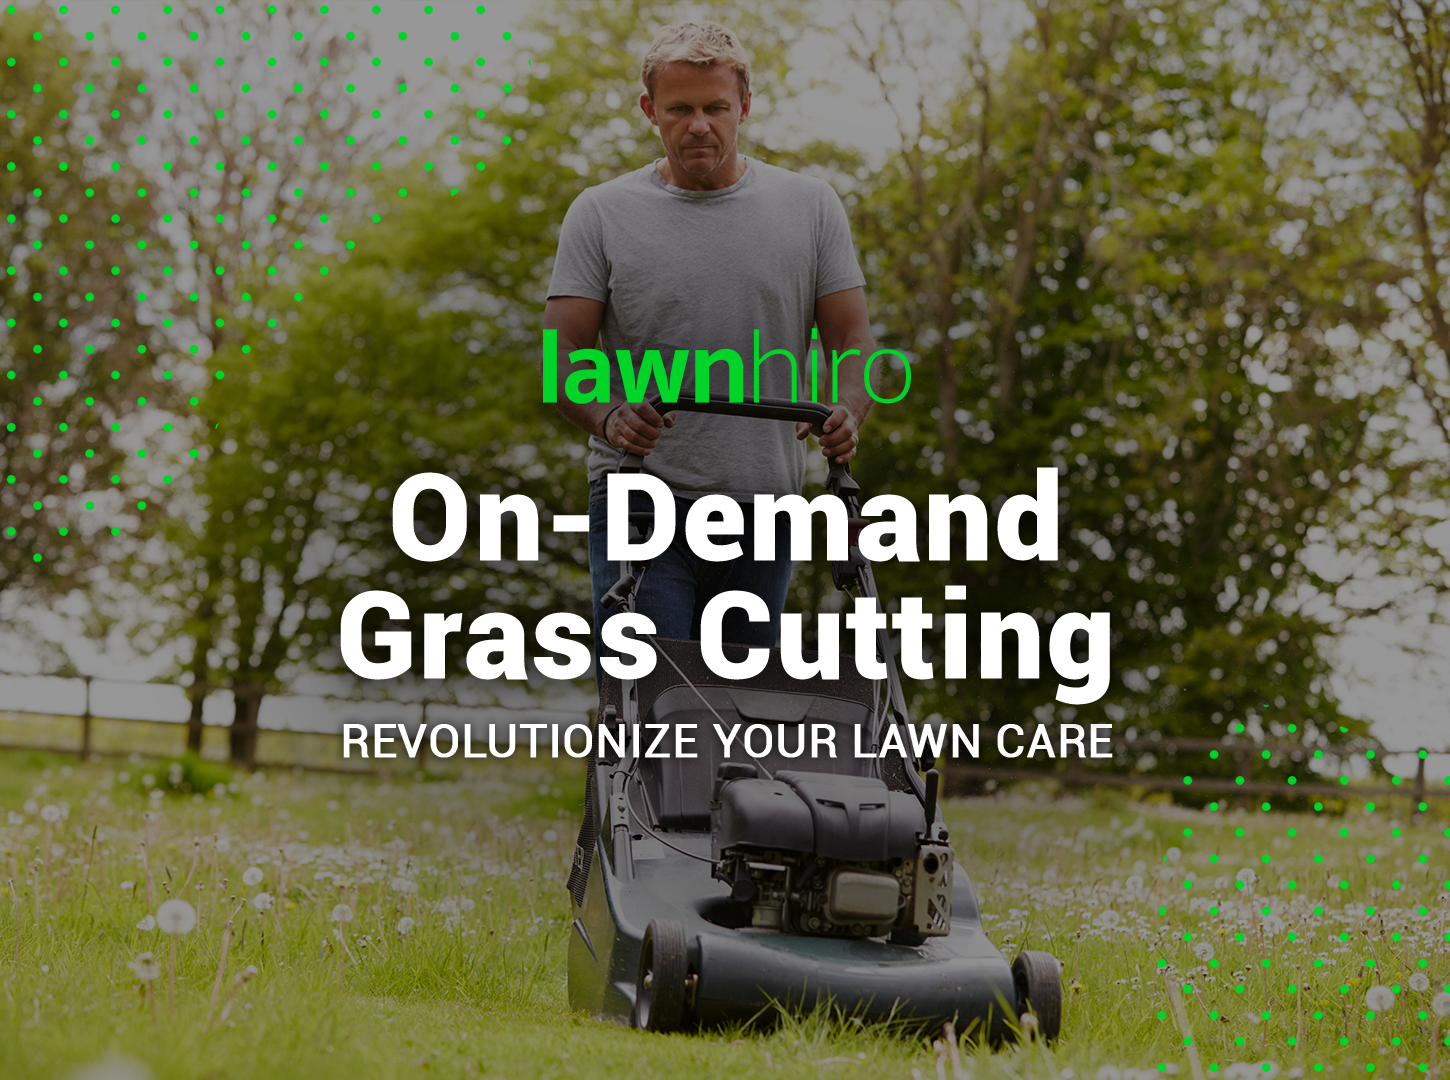 Featured image for “On-Demand Grass Cutting: Revolutionize Your Lawn Care”